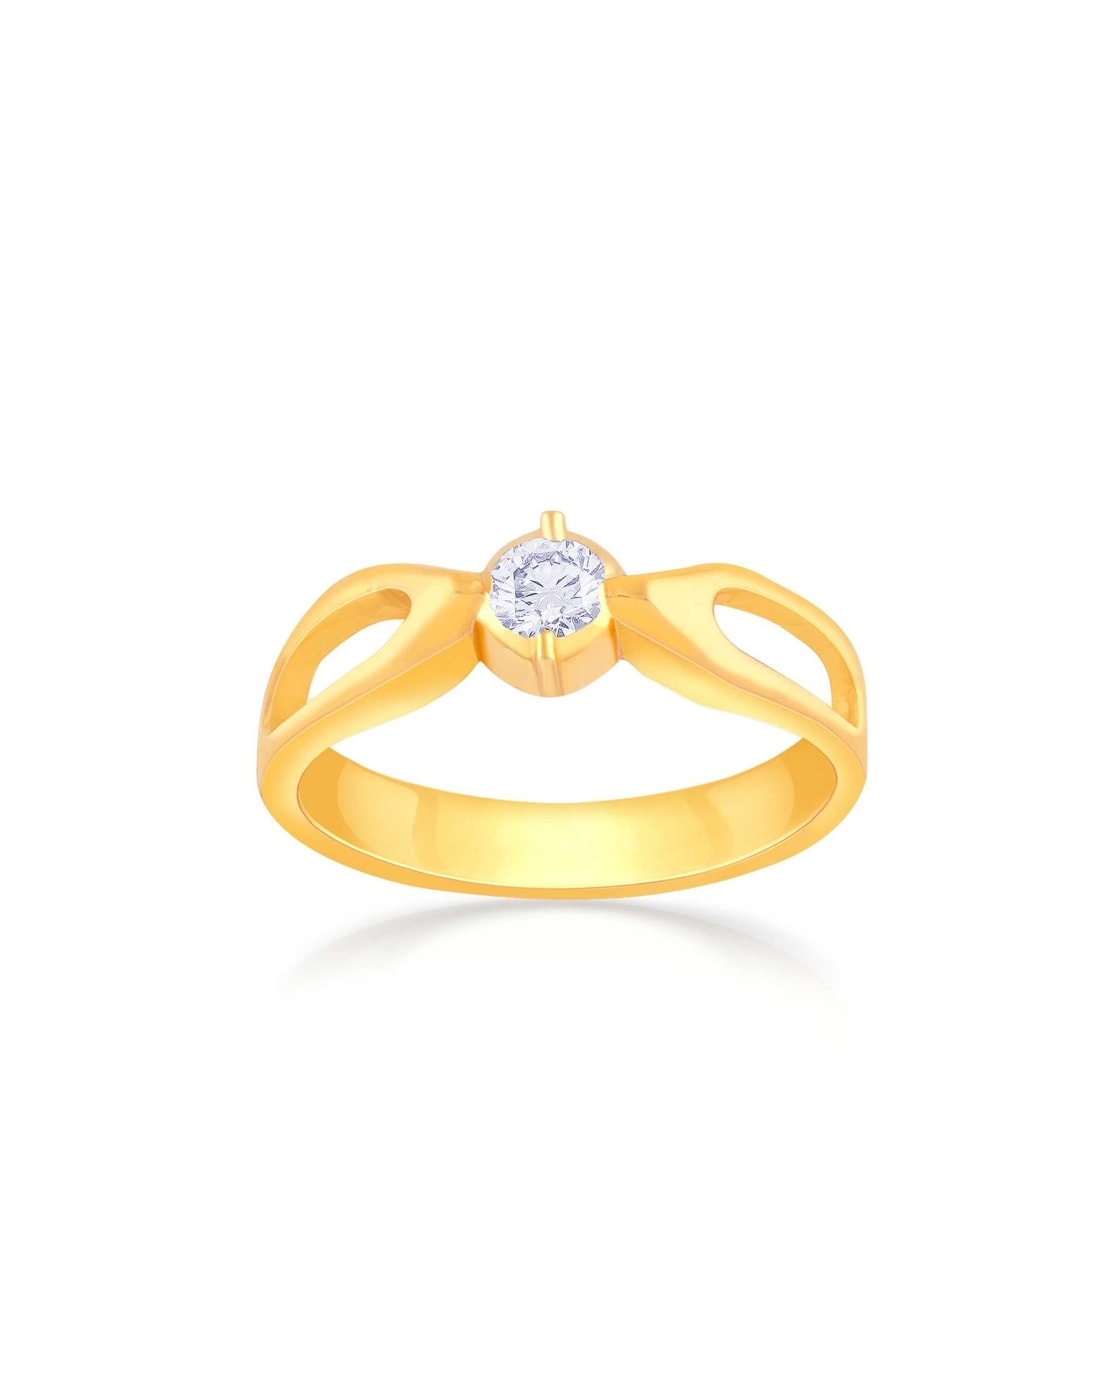 Buy MALABAR GOLD AND DIAMONDS Mine Diamond Ring - Size 11 | Shoppers Stop